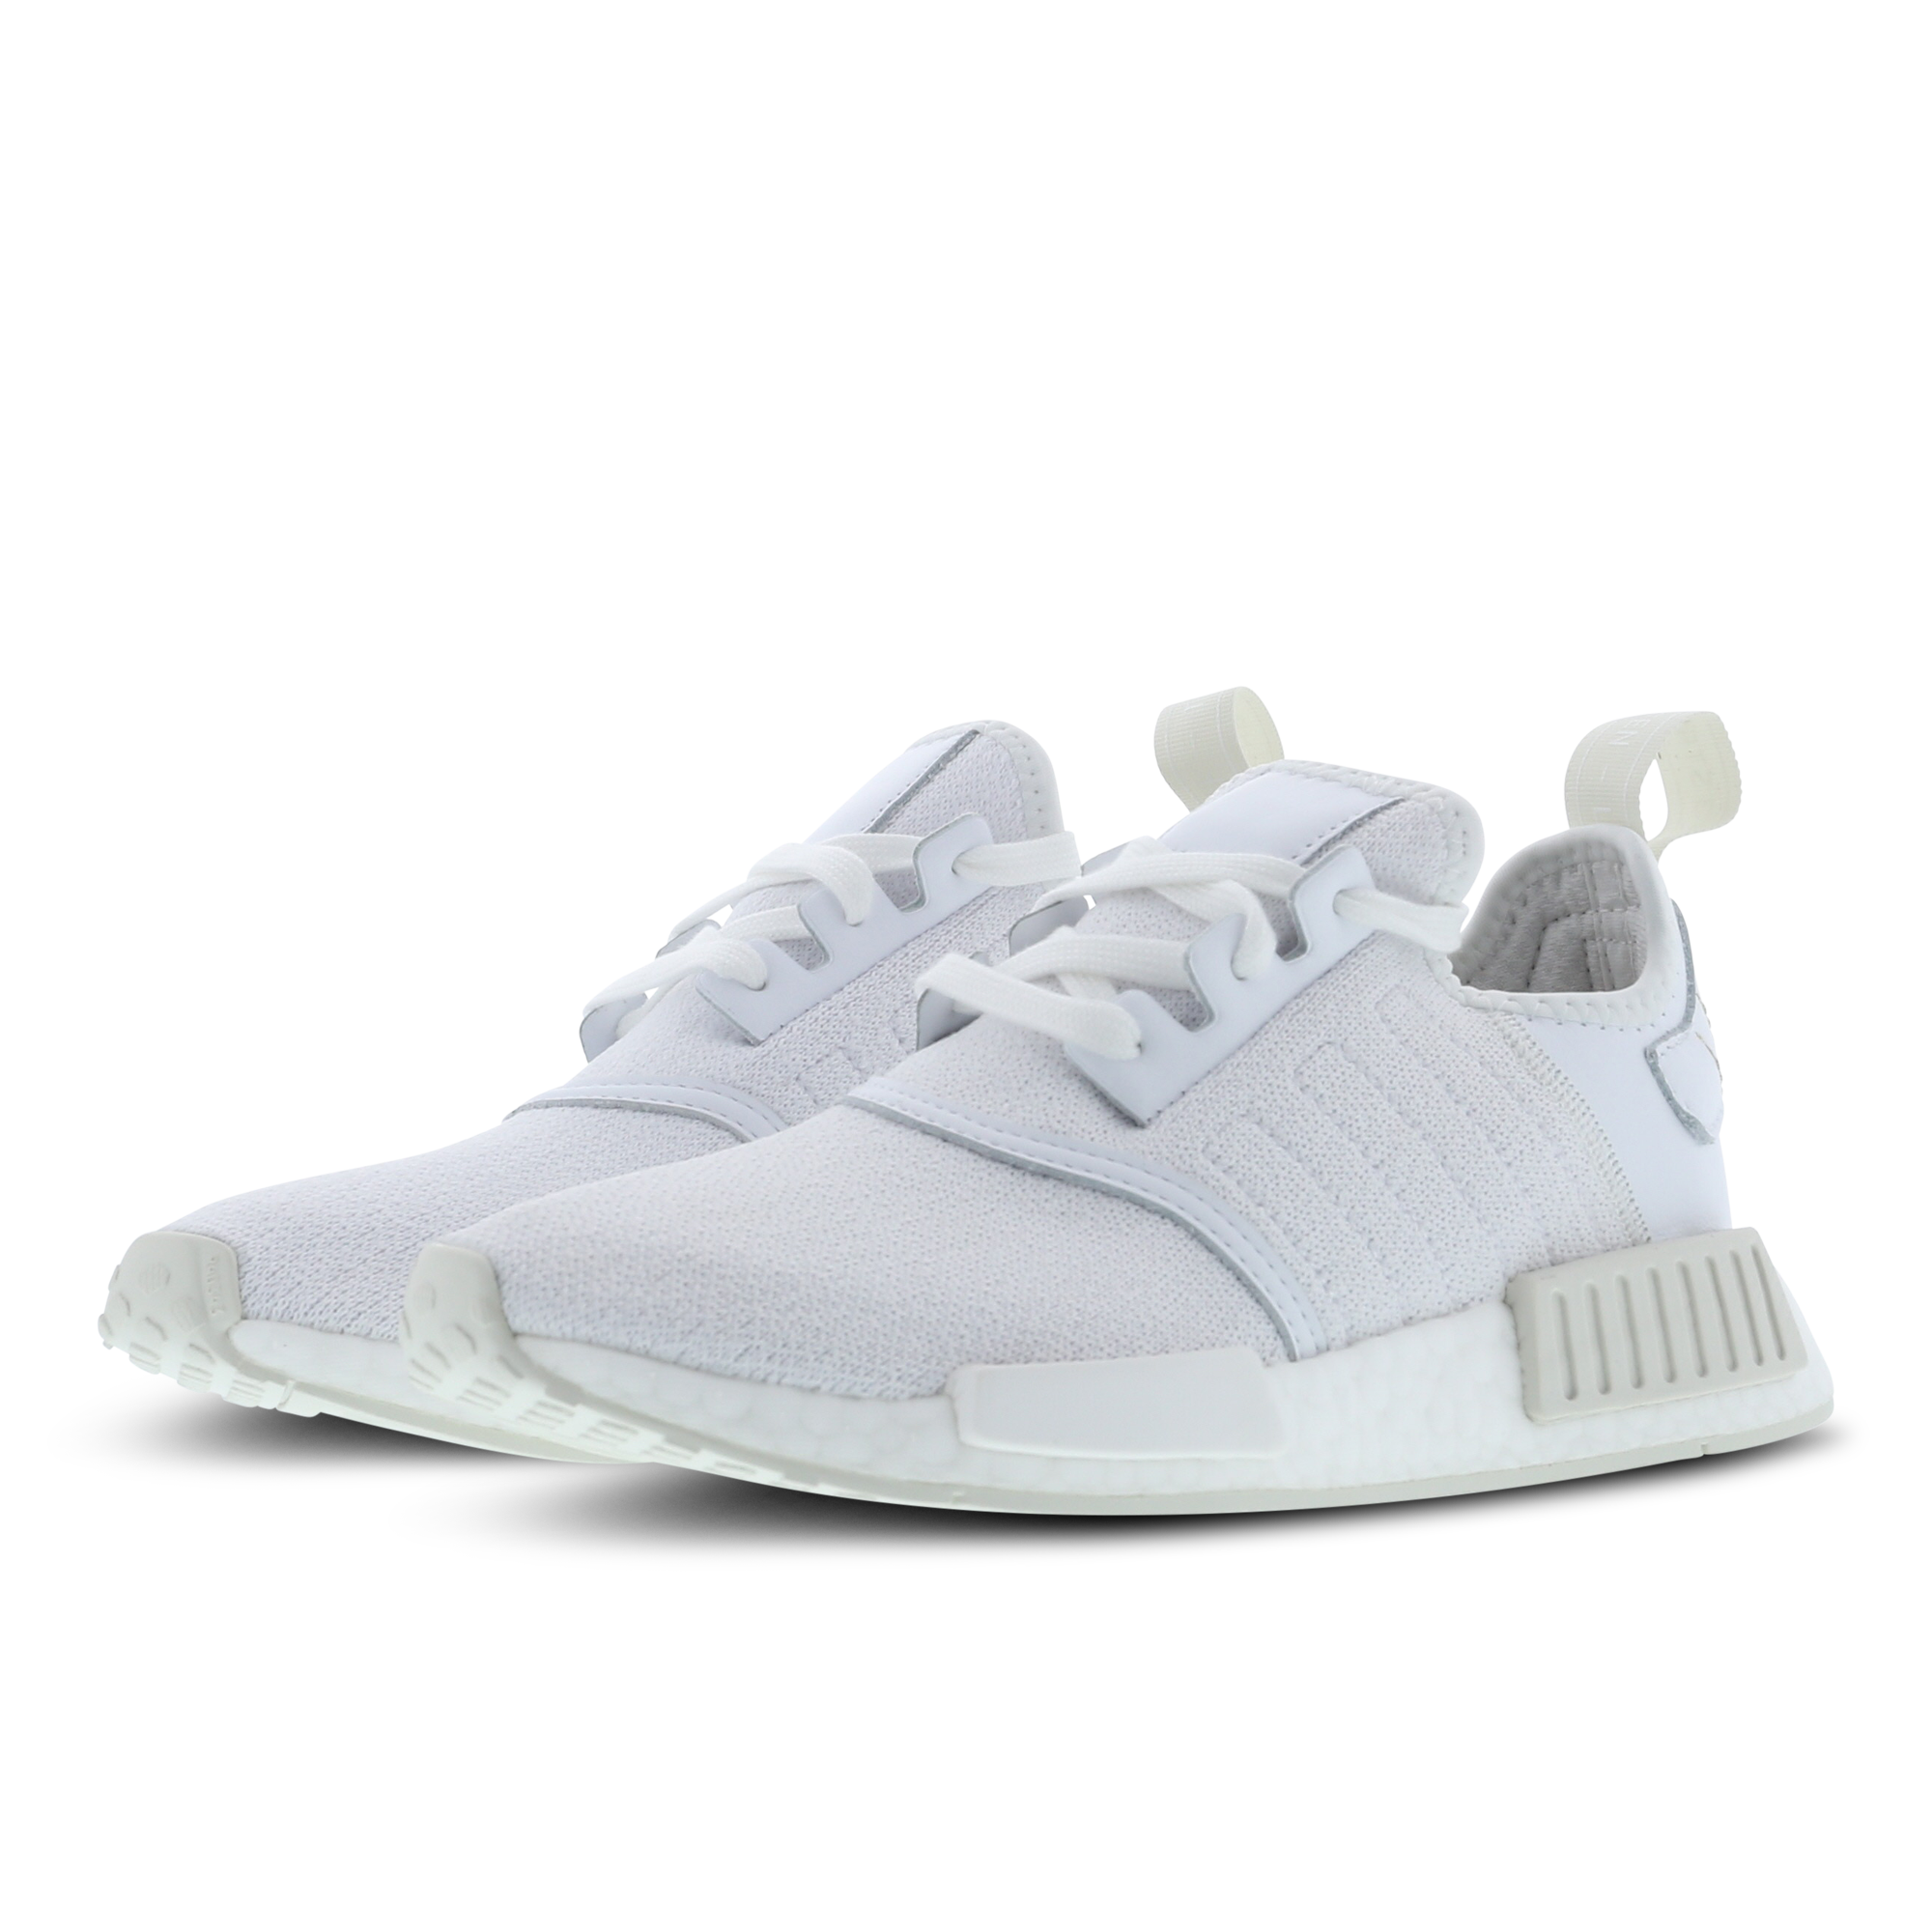 nmd r1 white shoes